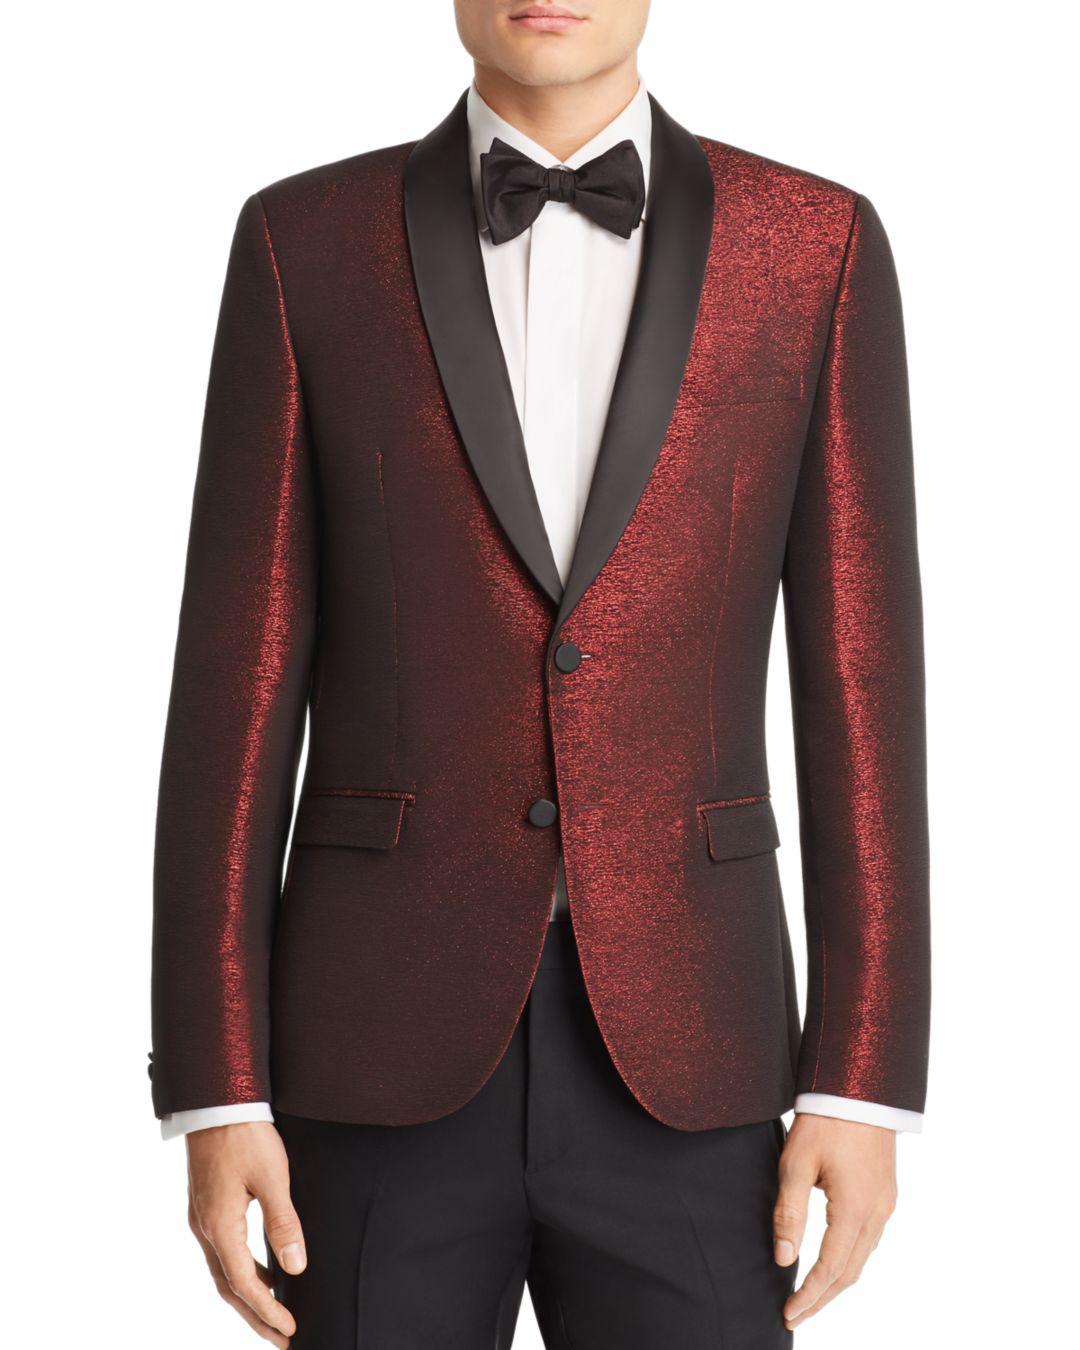 red sparkly suit jacket